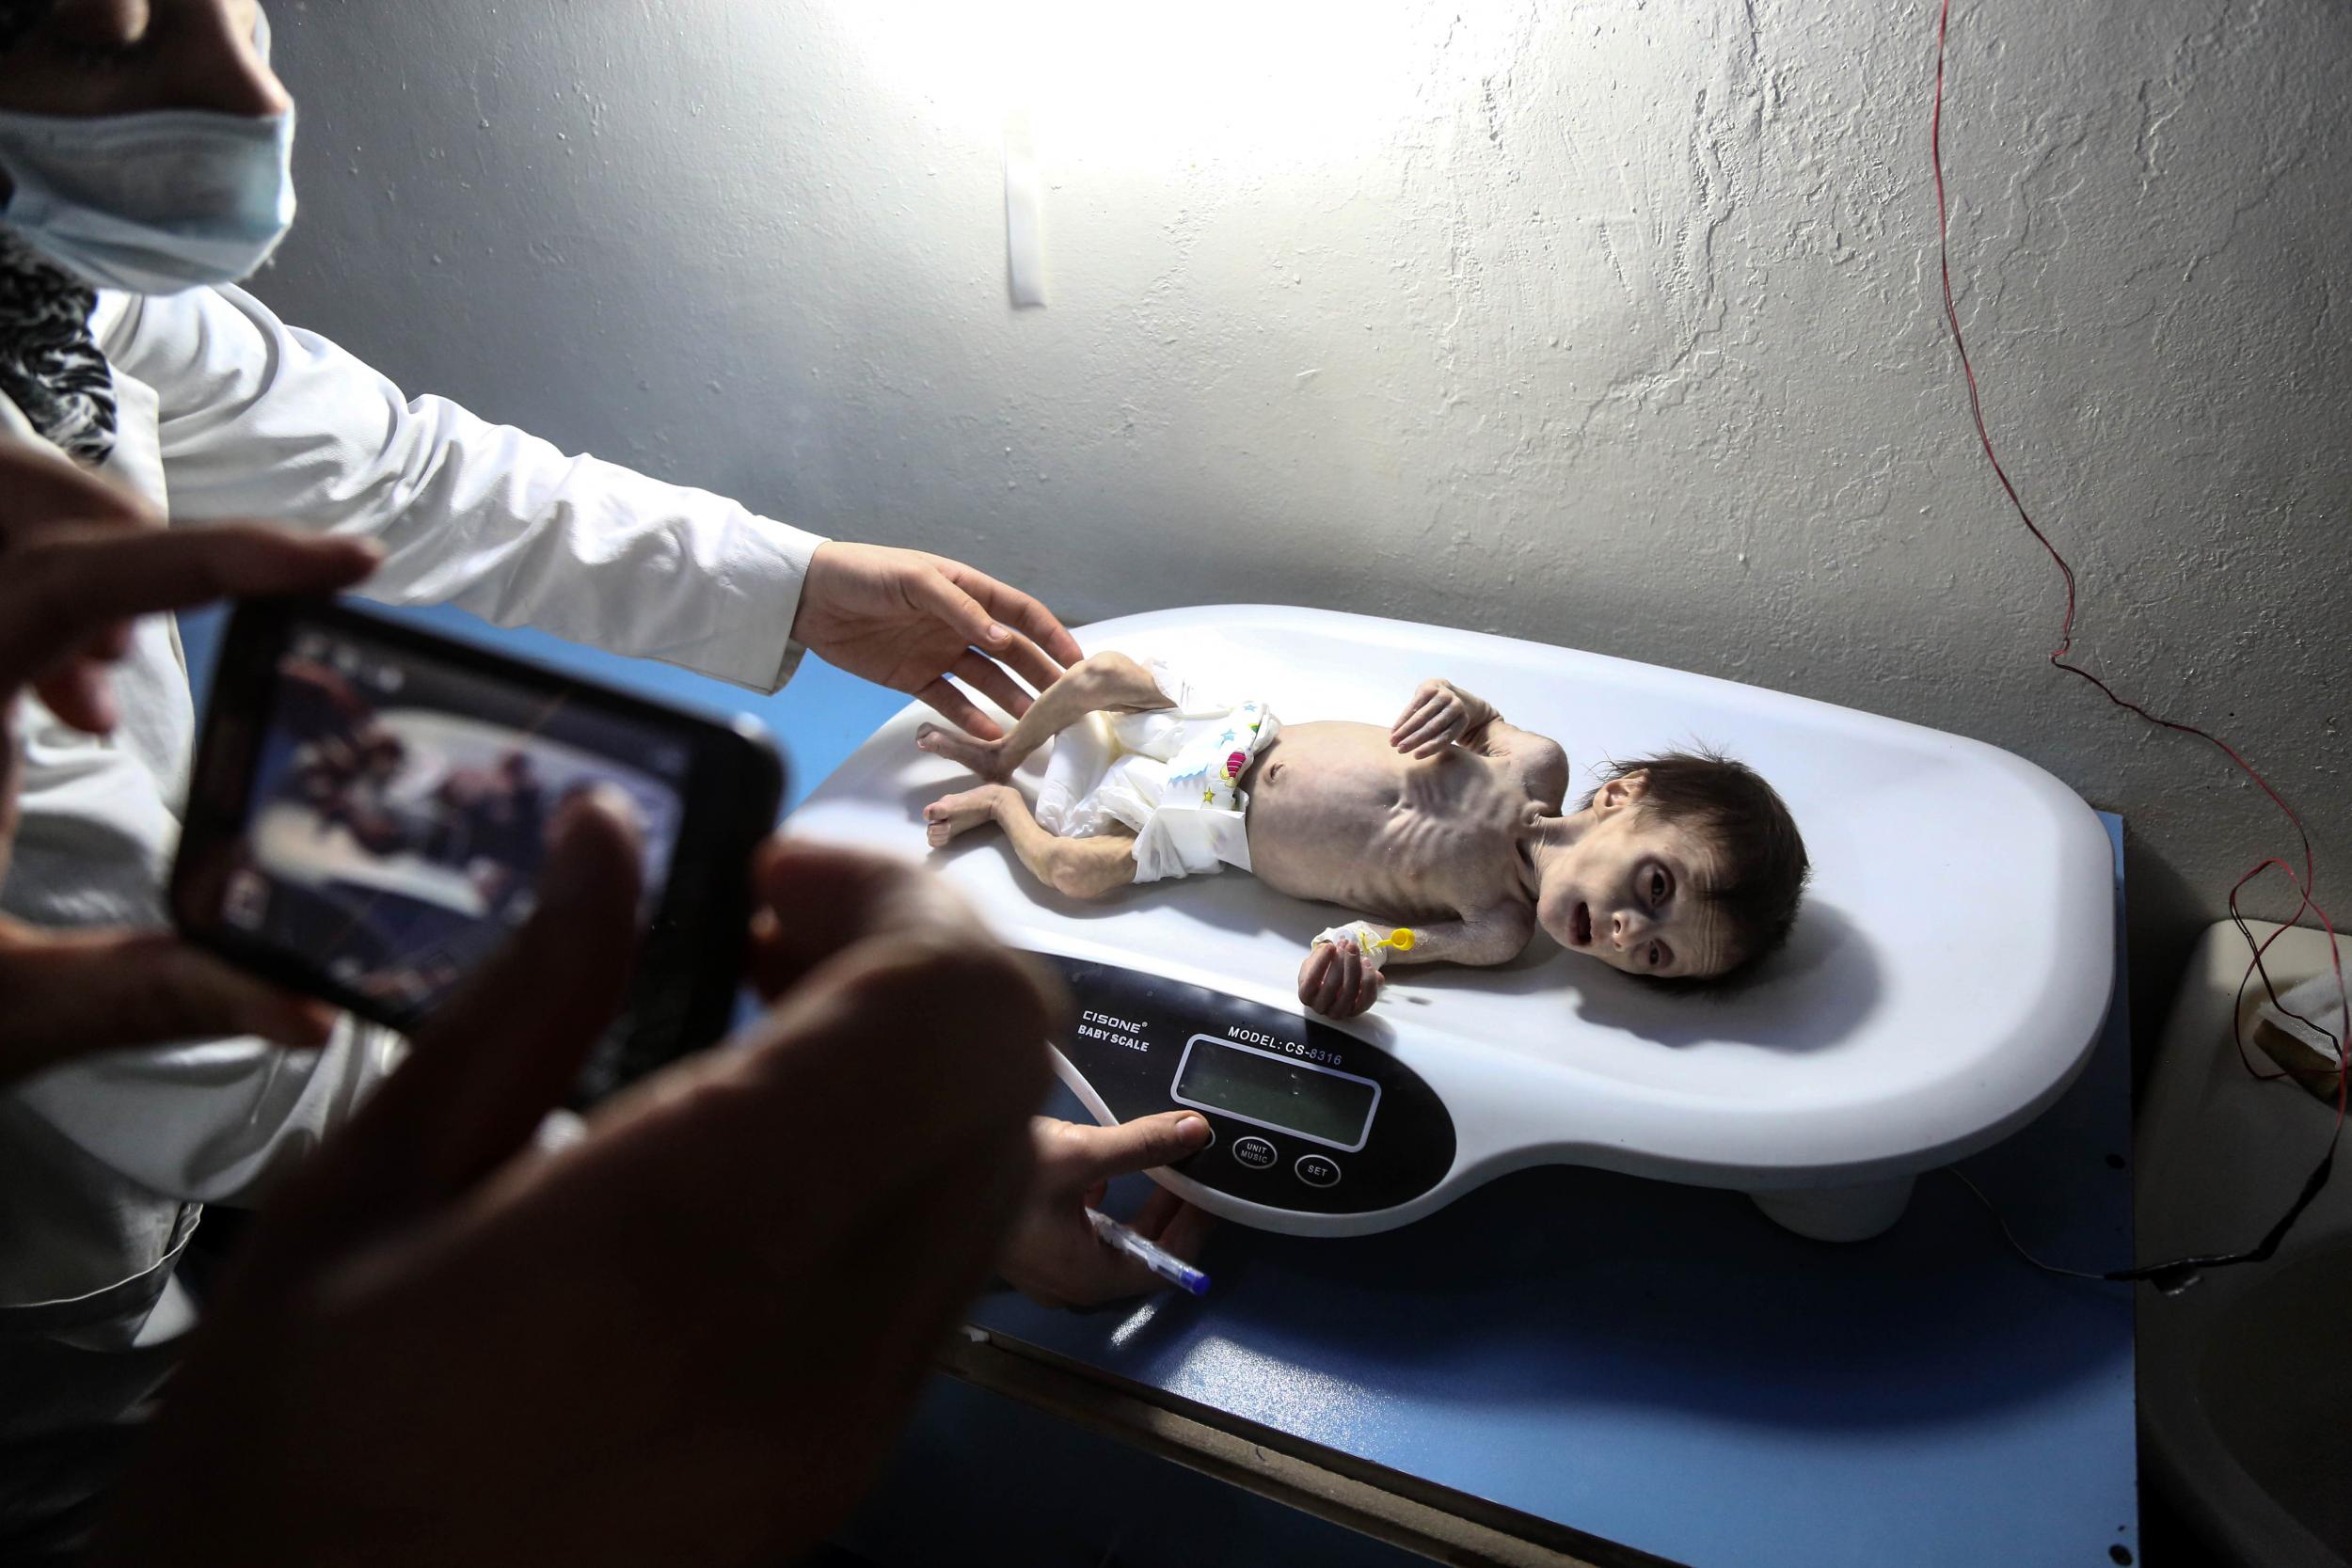 &#13;
Samar weighed just 1.9 kg (four pounds) when she was admitted by her also malnourished mother (AFP/Getty)&#13;